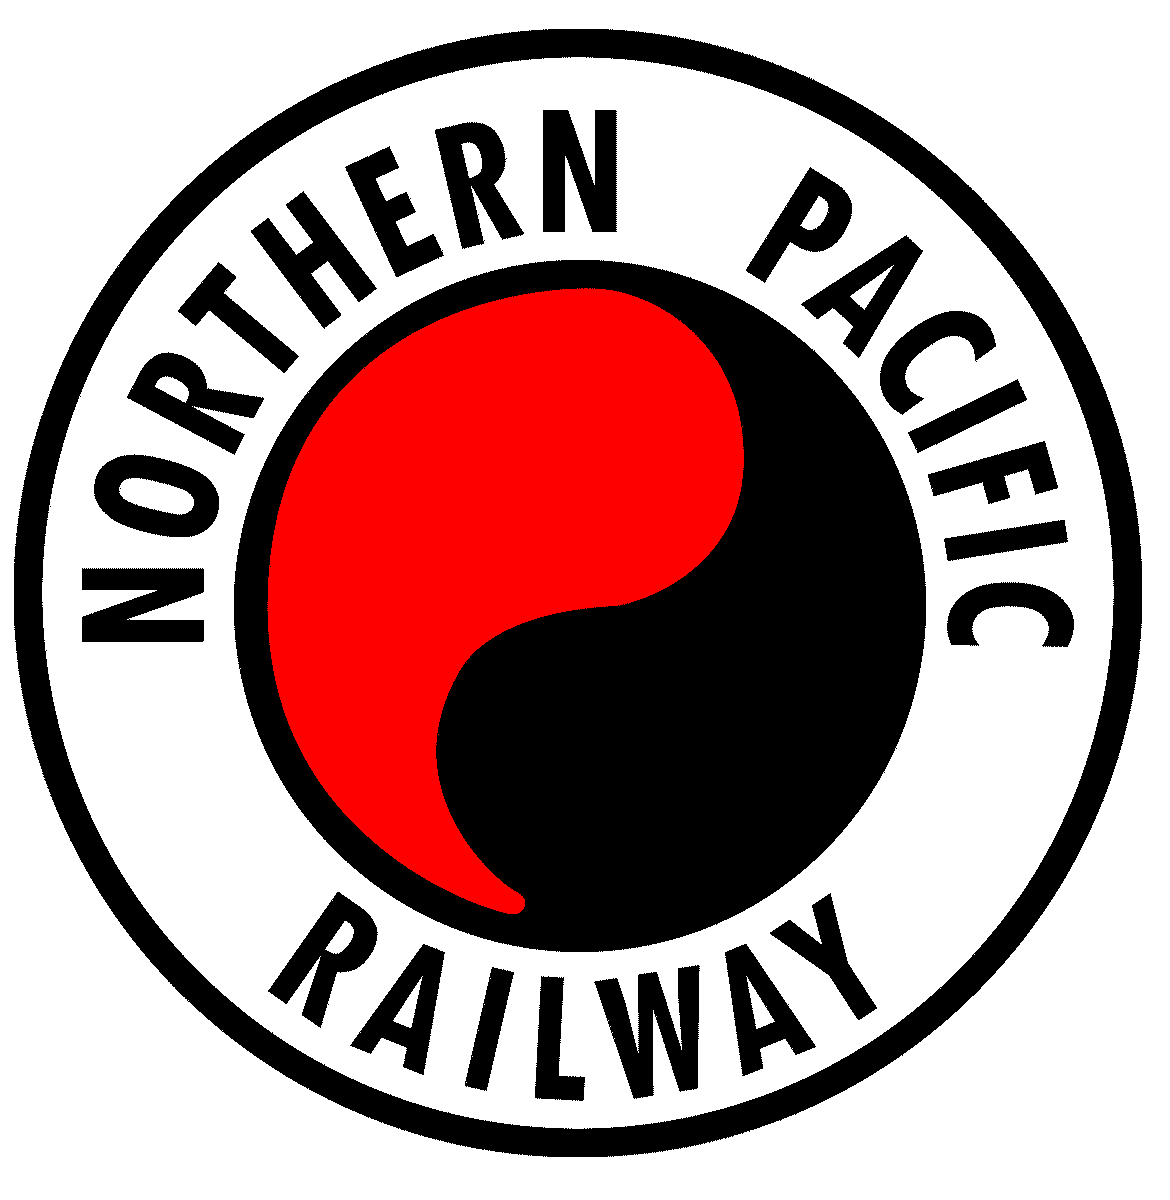 Northern Pacific Railway livery sample